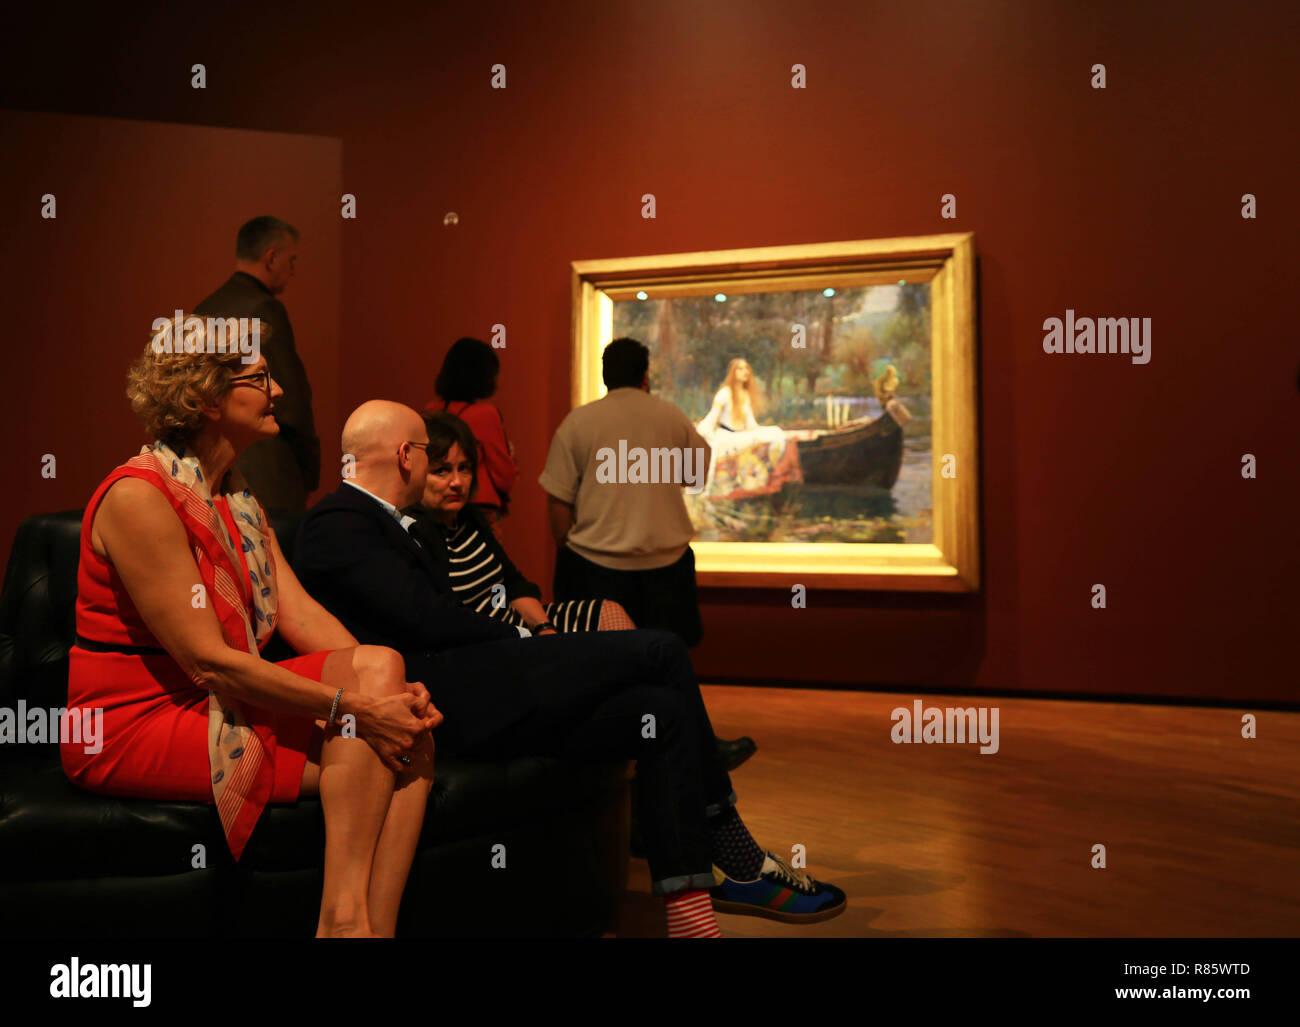 Canberra, Australia. 12th Dec, 2018. People view The Lady of Shalott at the National Gallery of Australia (NGA) in Canberra, Australia, Dec. 12, 2018. For the first time paintings The Lady of Shalott and Ophelia left Britain for Australia, as an exhibition named 'Love and Desire: Pre-Raphaelite Masterpieces from the Tate', will open to the public in the NGA on Friday. Credit: Pan Xiangyue/Xinhua/Alamy Live News Stock Photo